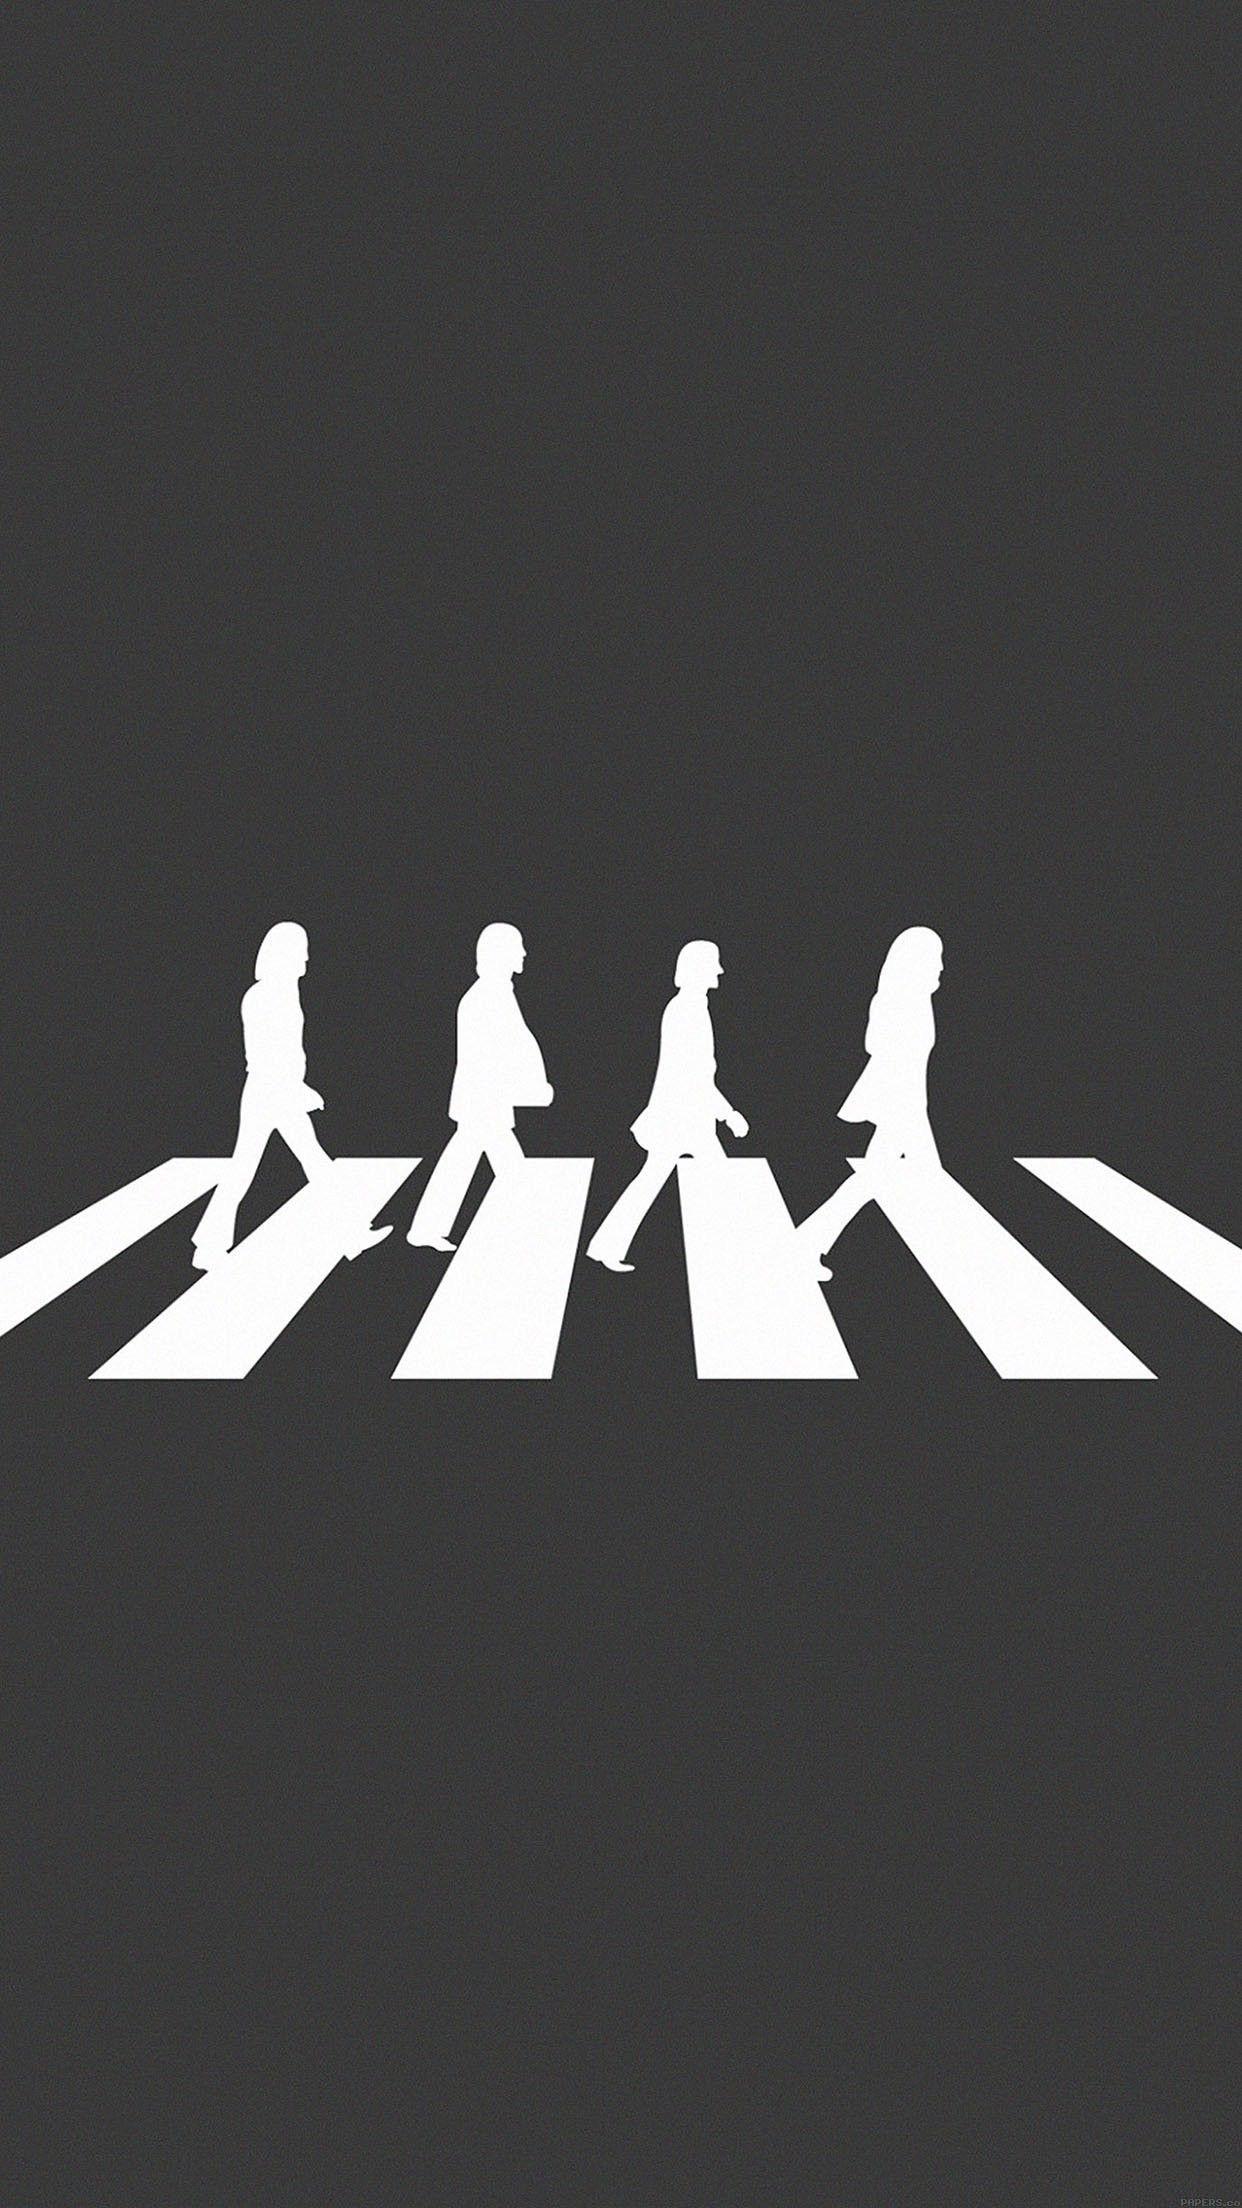 Beatles Wallpaper for iPhone. New